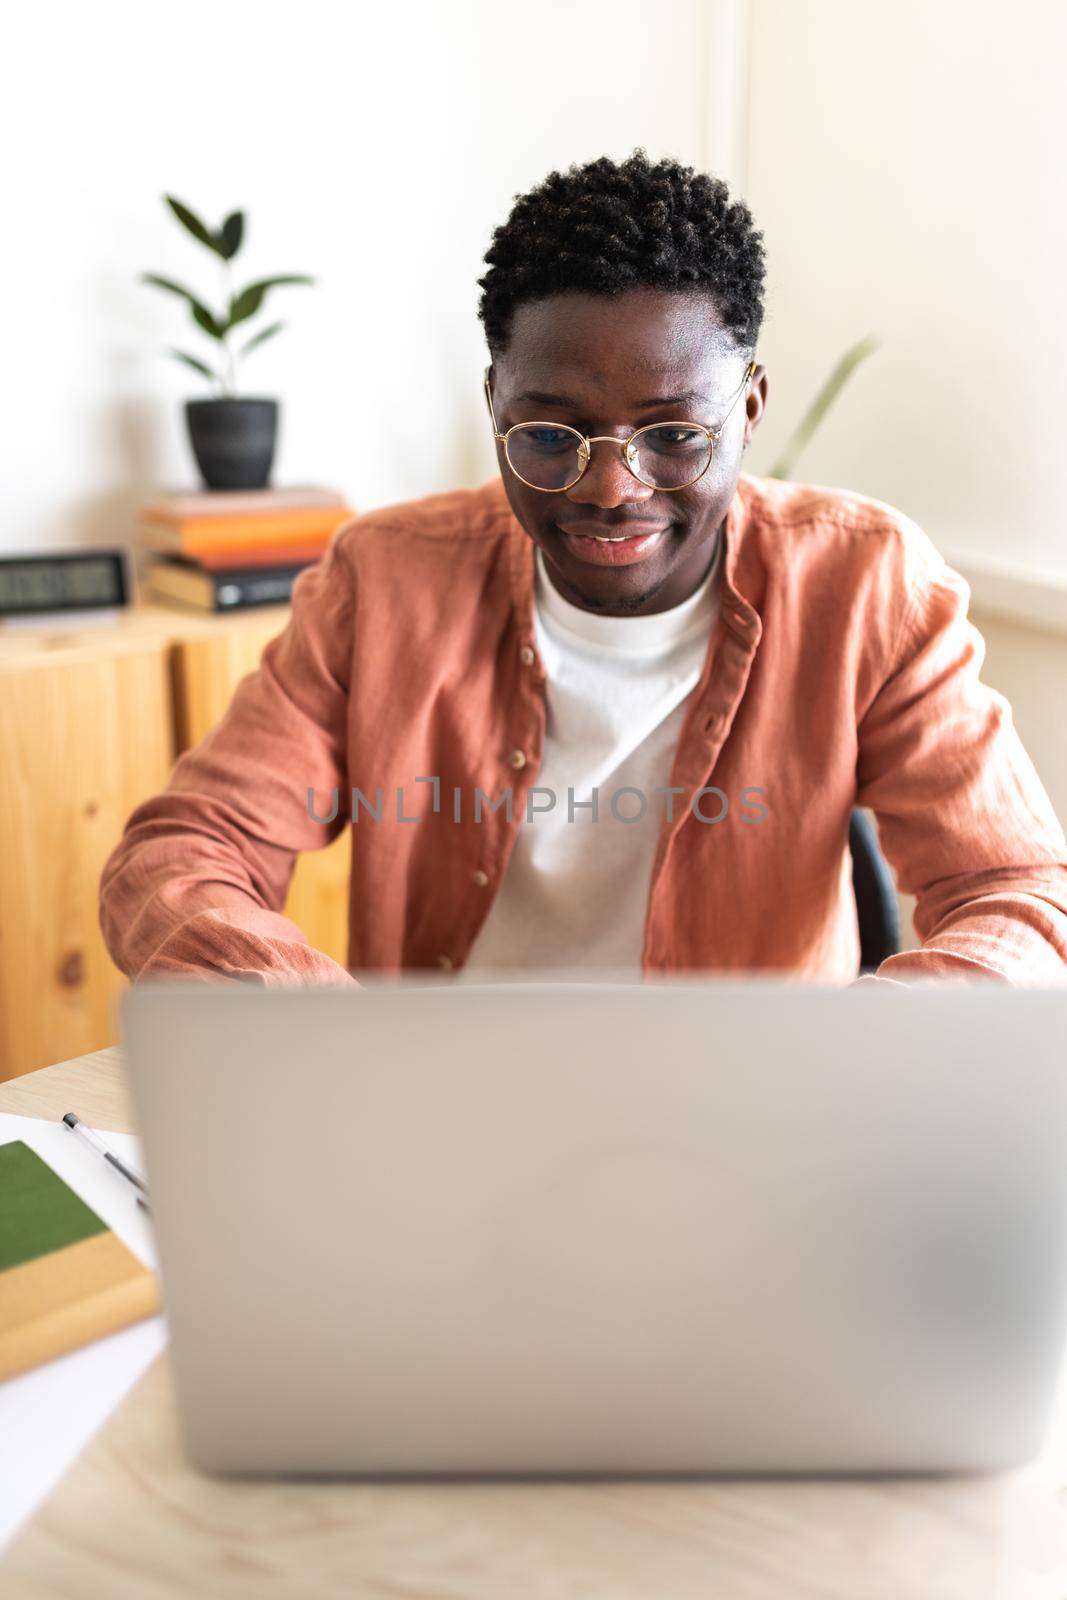 African American male college student studying at home using laptop. Vertical image. Education and technology